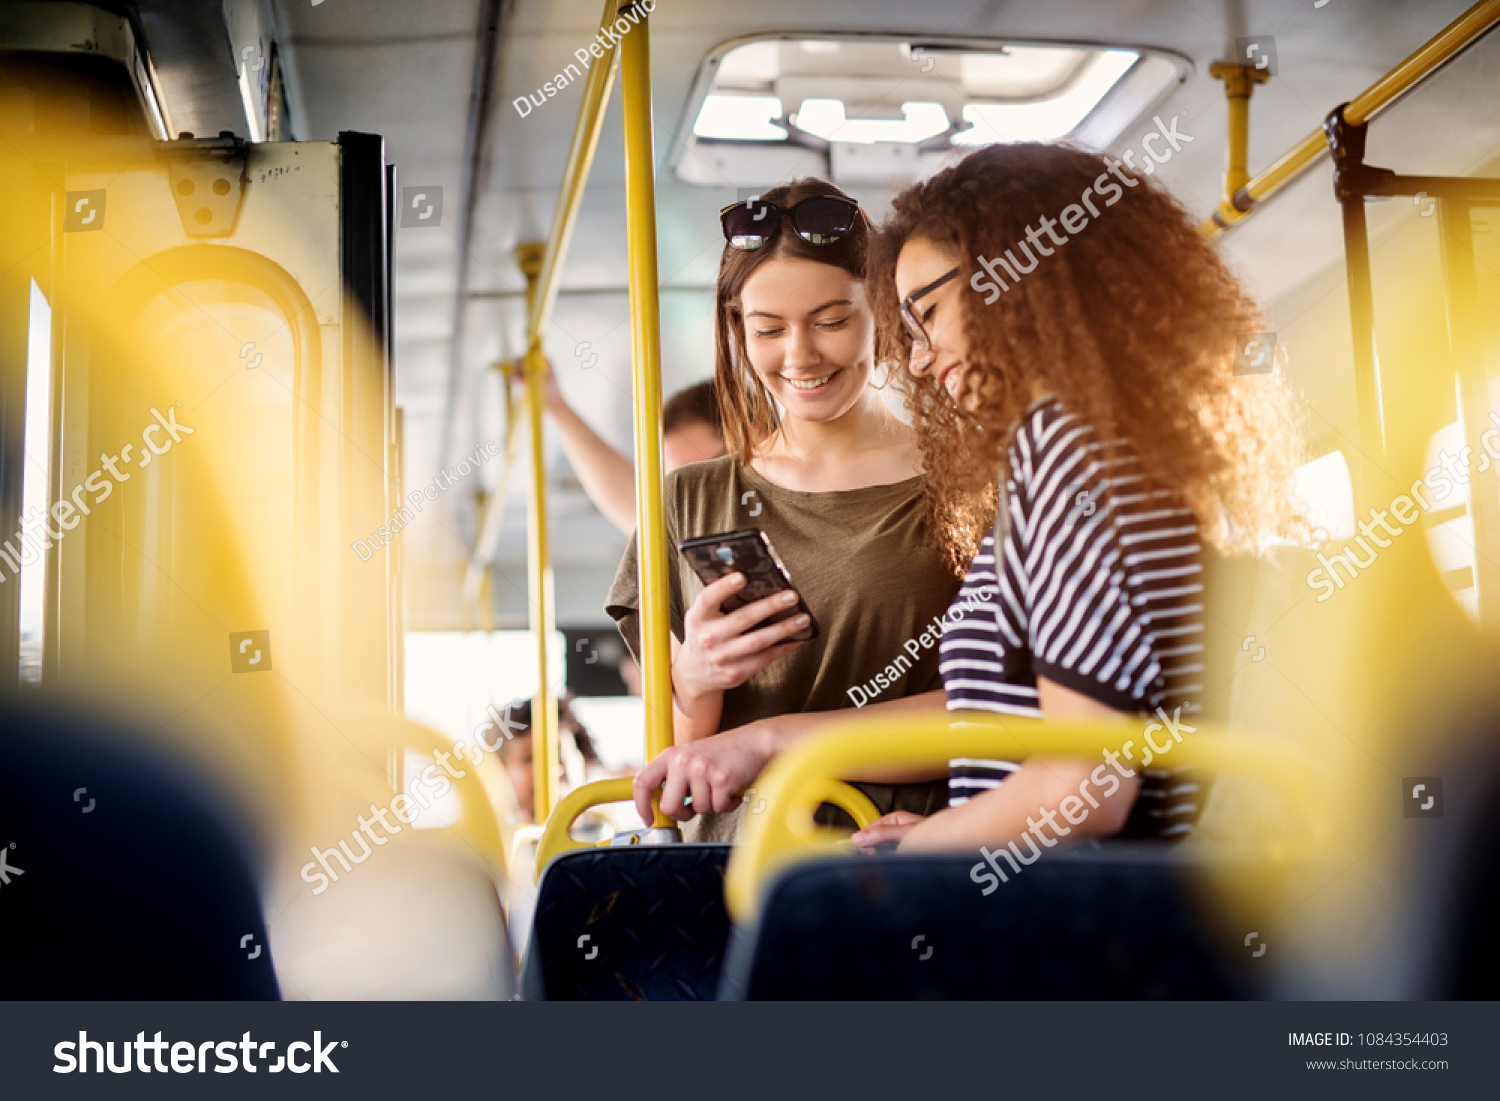 Two cheerful pretty young women are standing in a bus and looking at the phone and smiling while waiting for a bus to take them to their destination. #1084354403